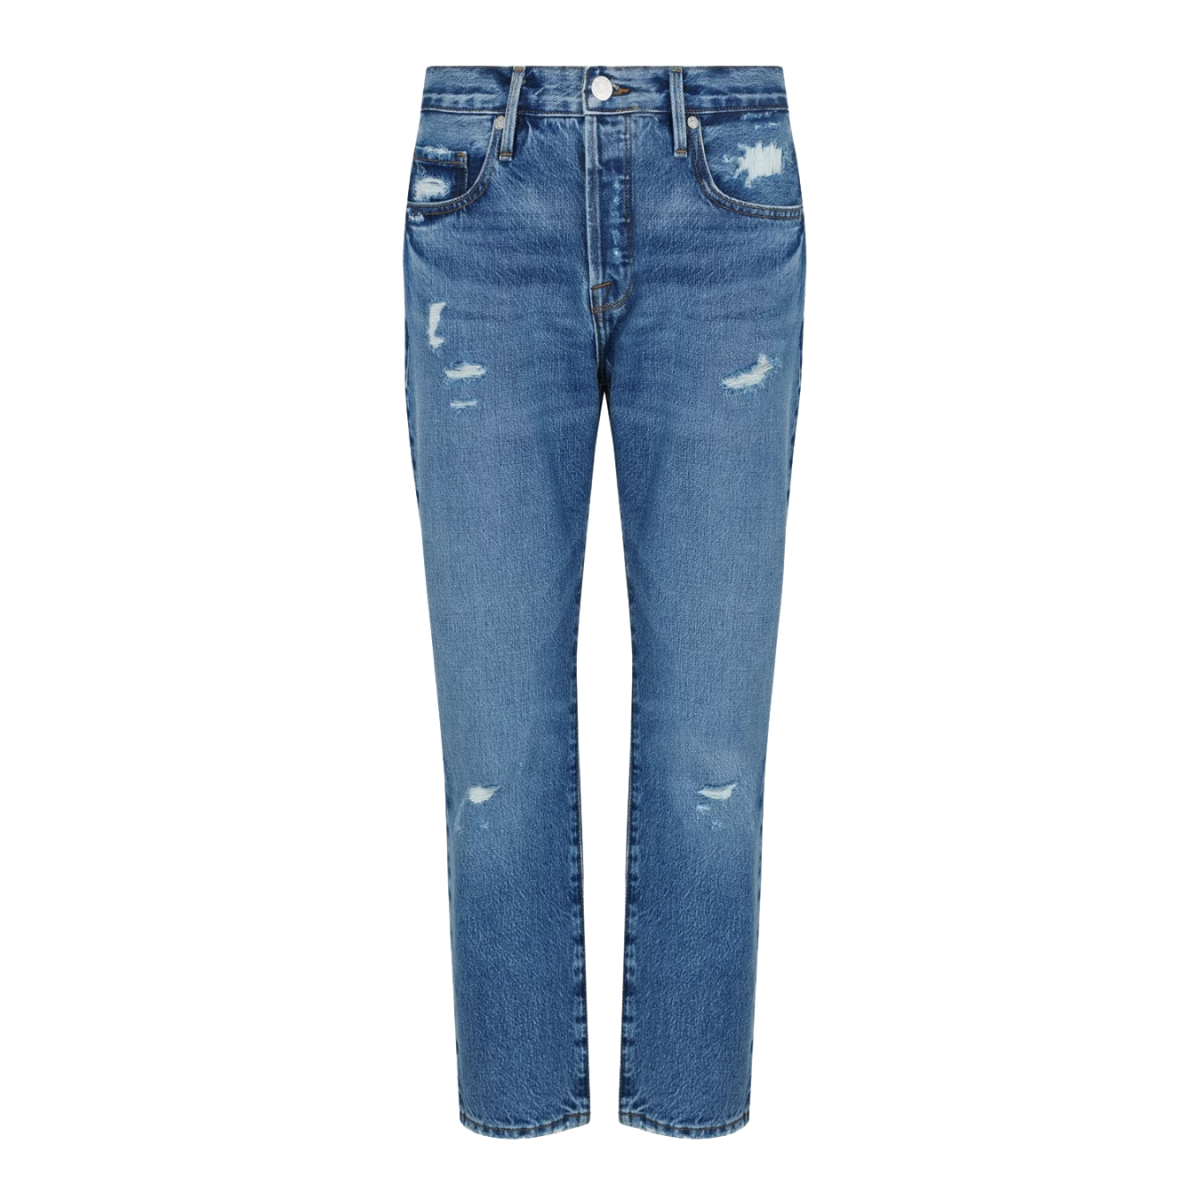 High waisted cropped, straight cut blue jeans